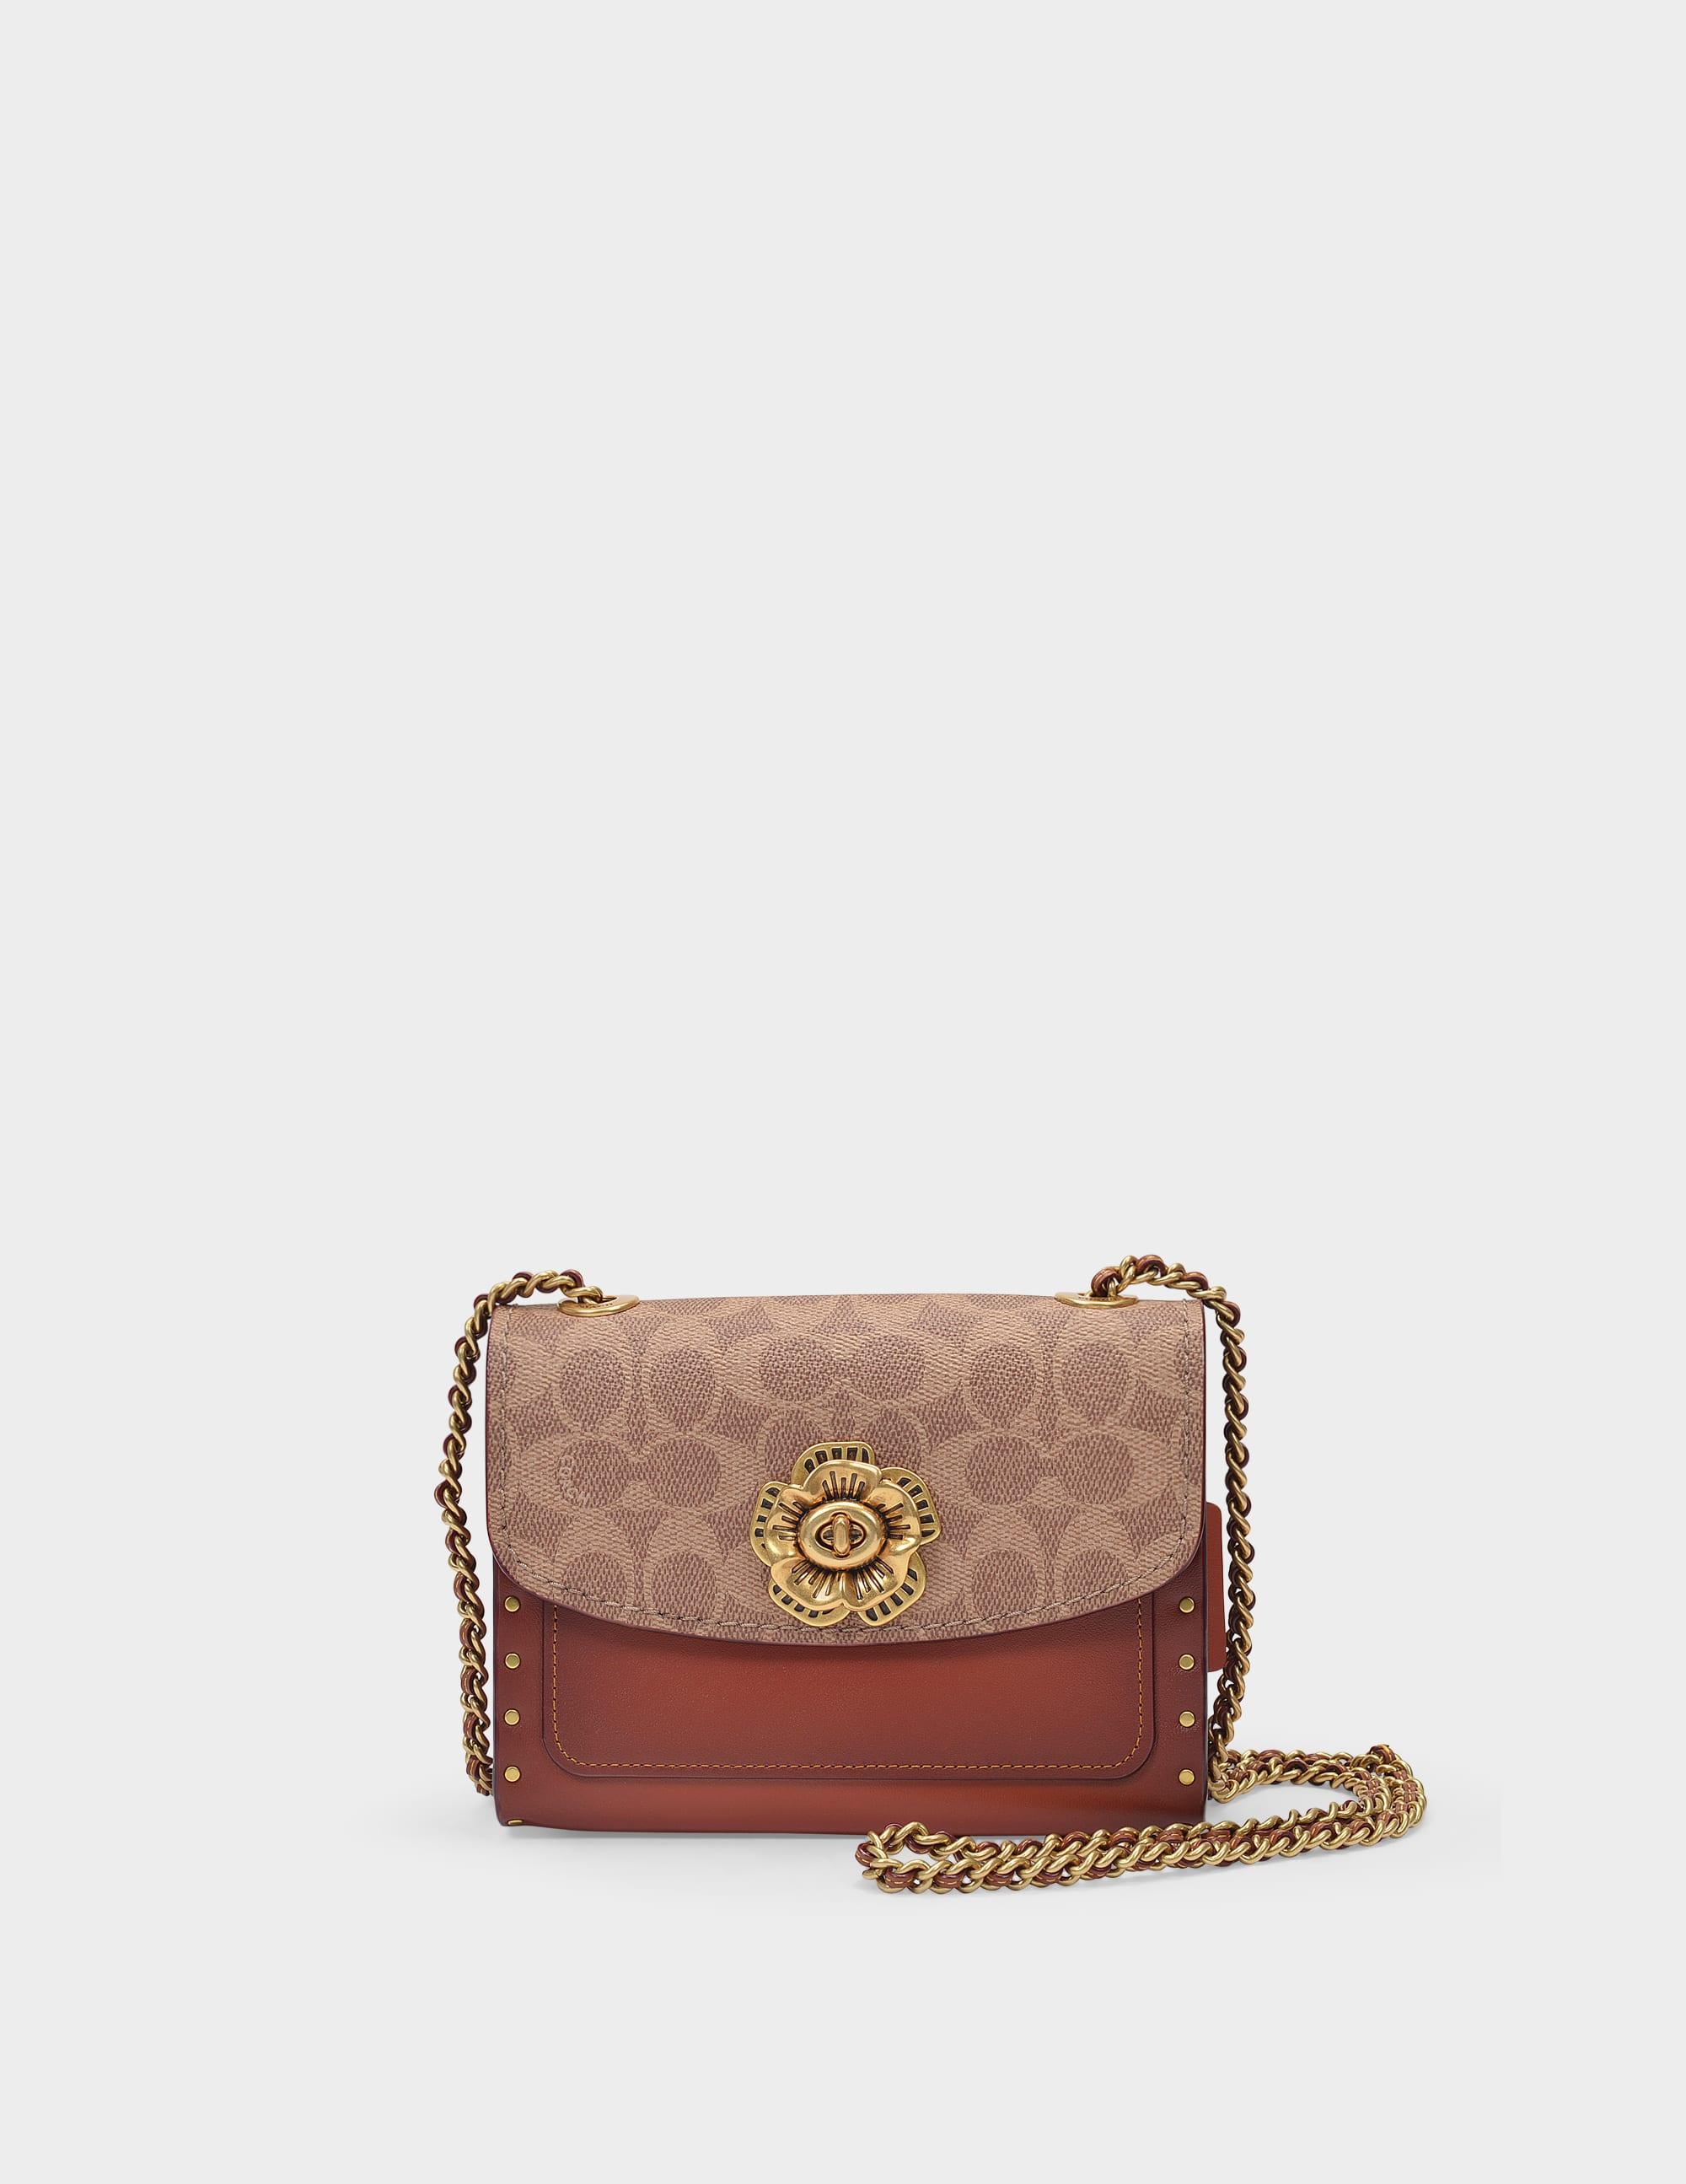 COACH Parker 18 Studded Crossbody Bag in Brown | Lyst